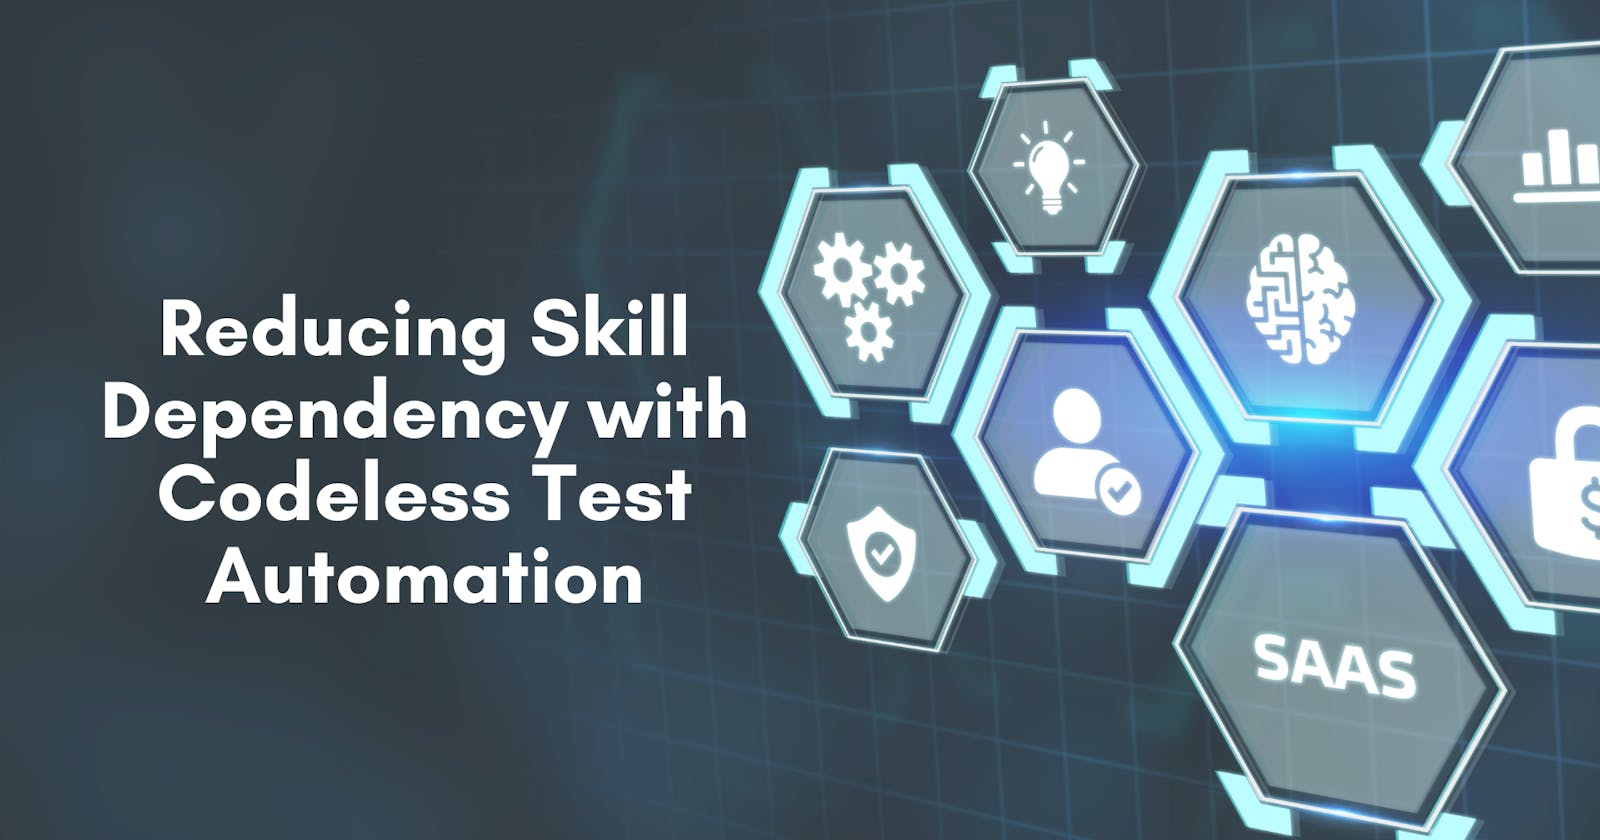 Reducing Skill Dependency with Codeless Test Automation